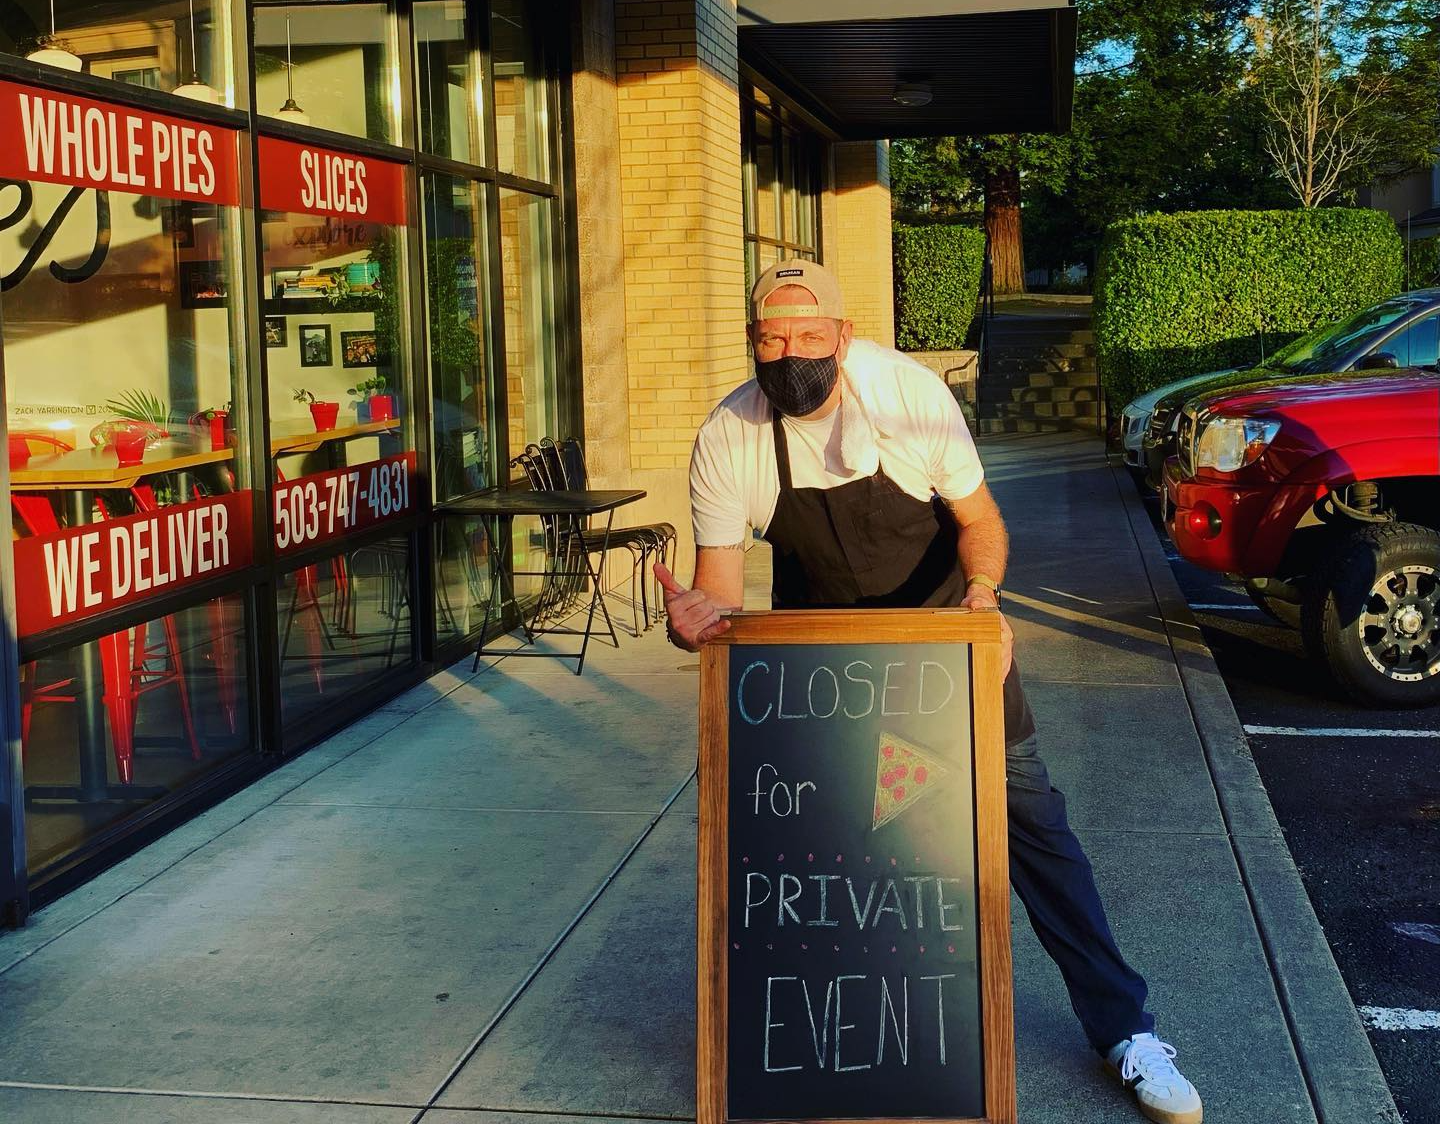 Josh outside with sign for a private event.